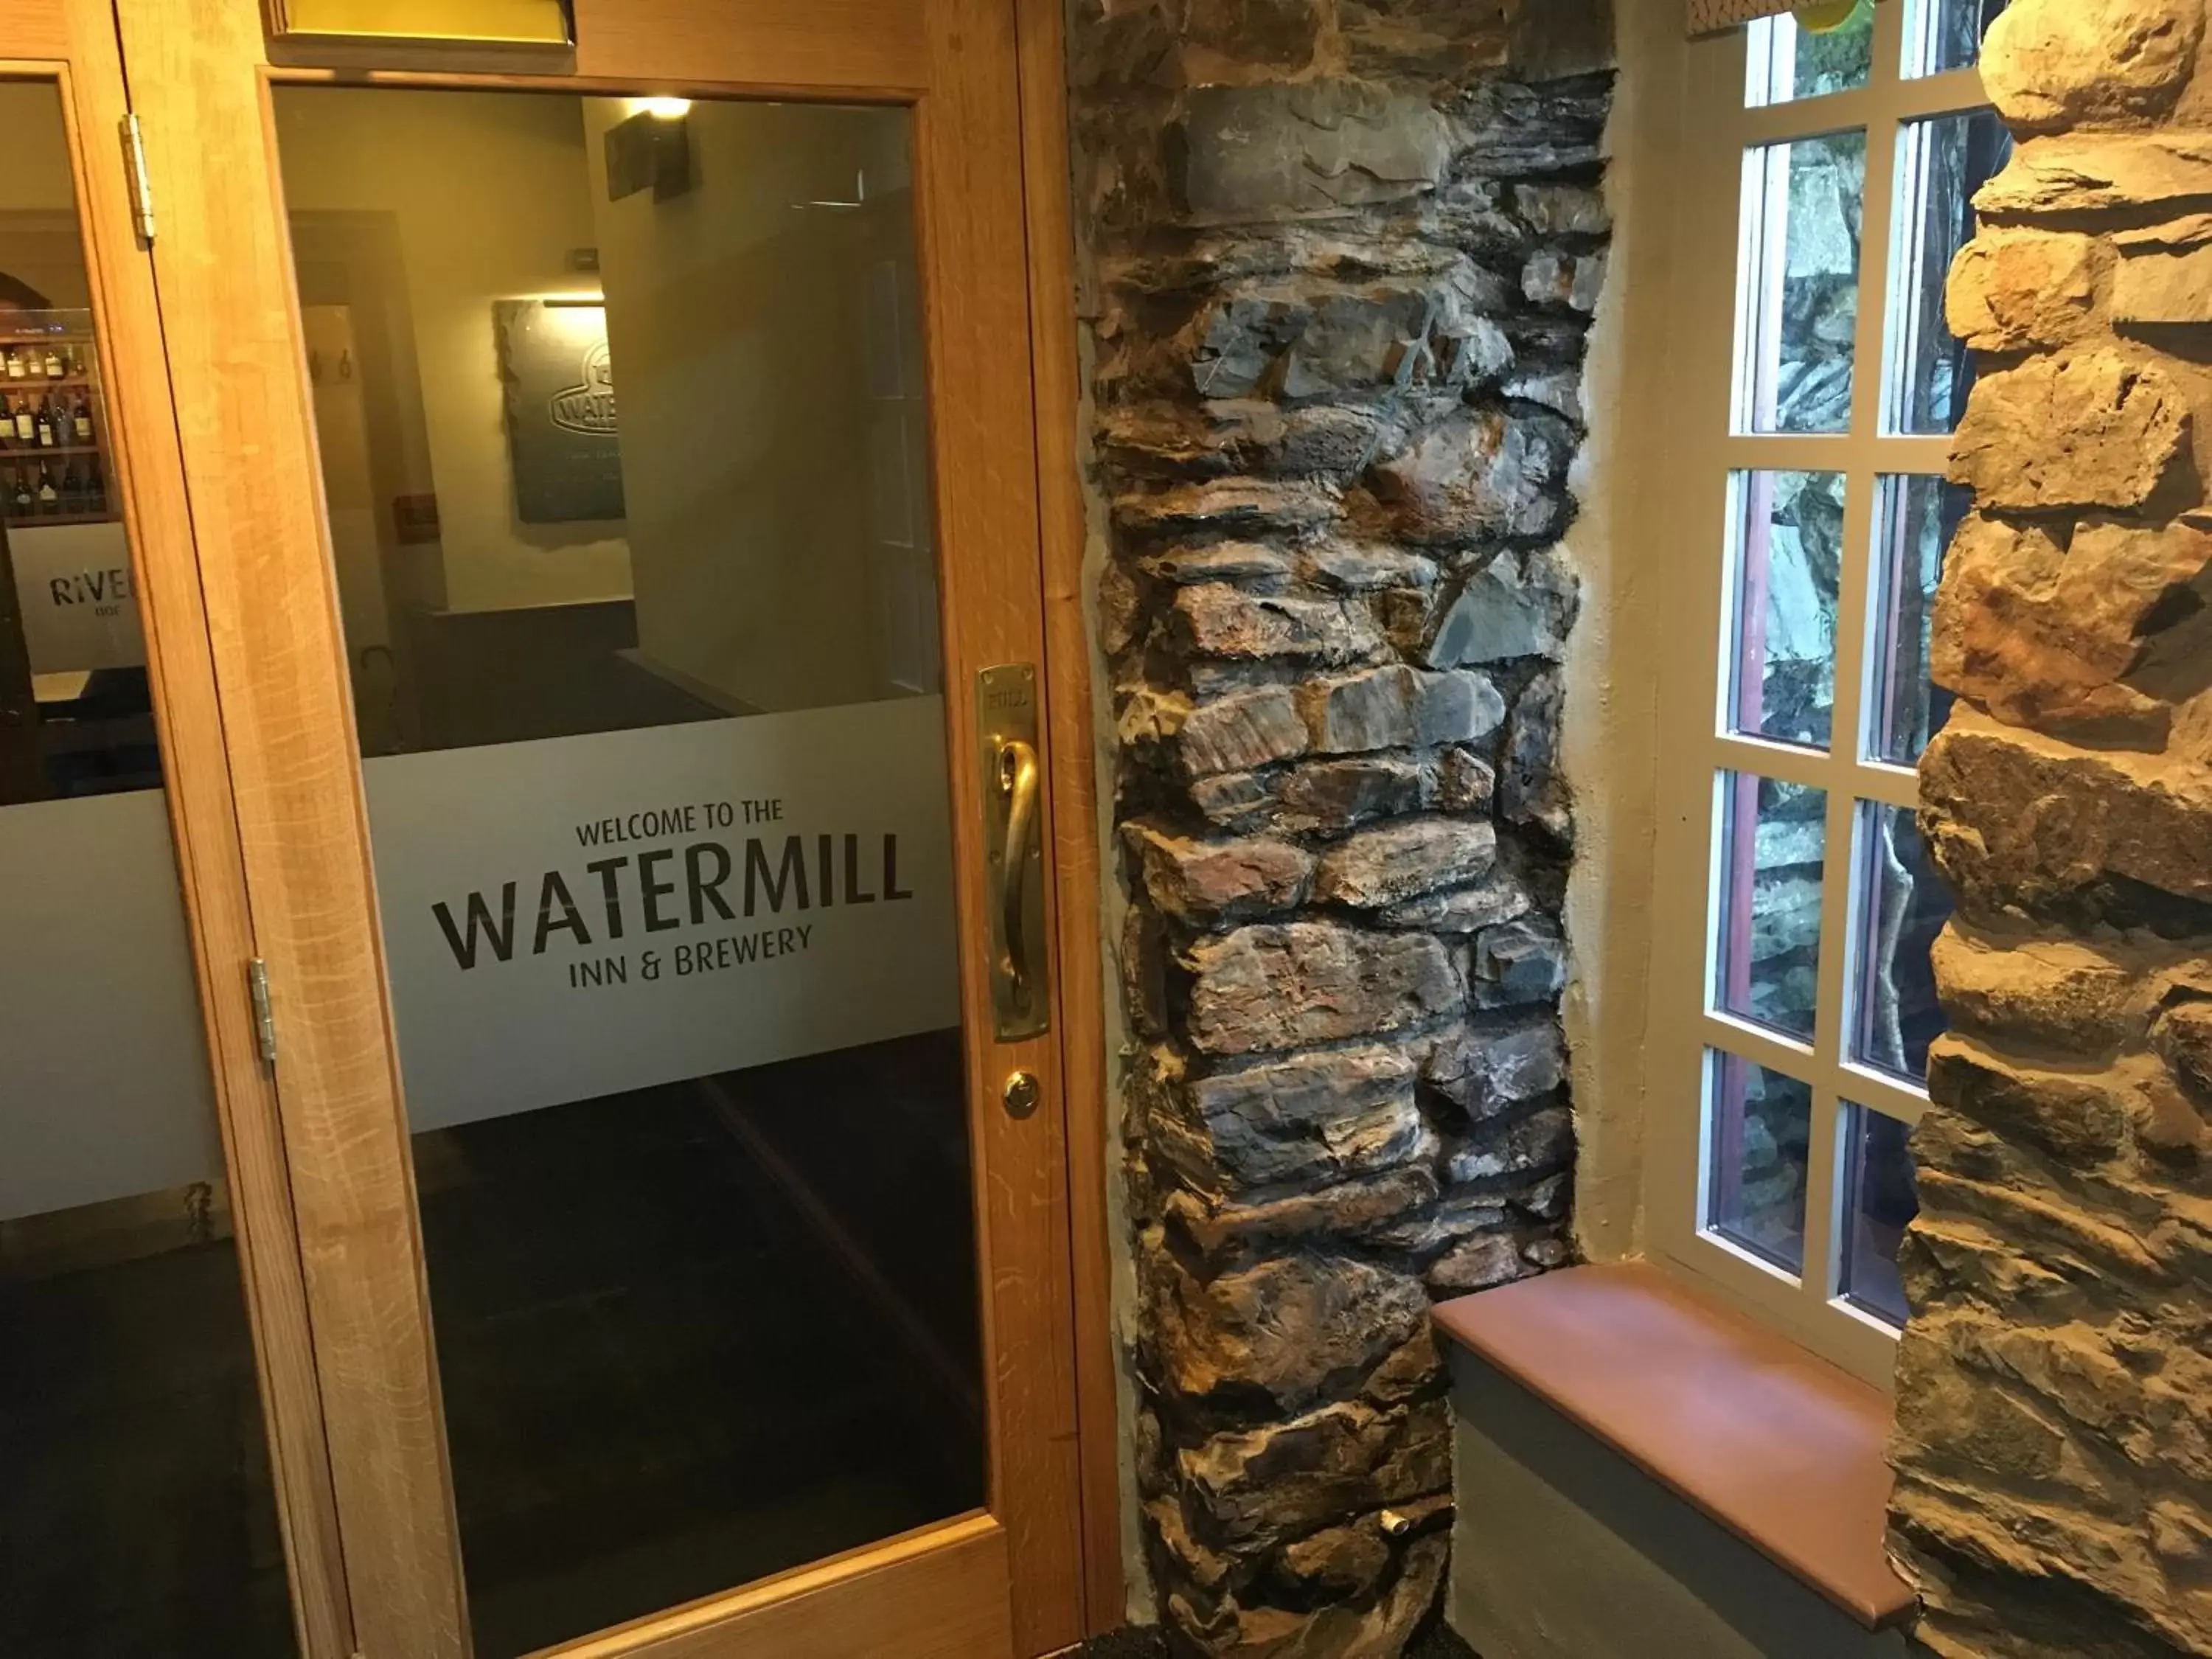 Property building in The Watermill Inn & Brewery